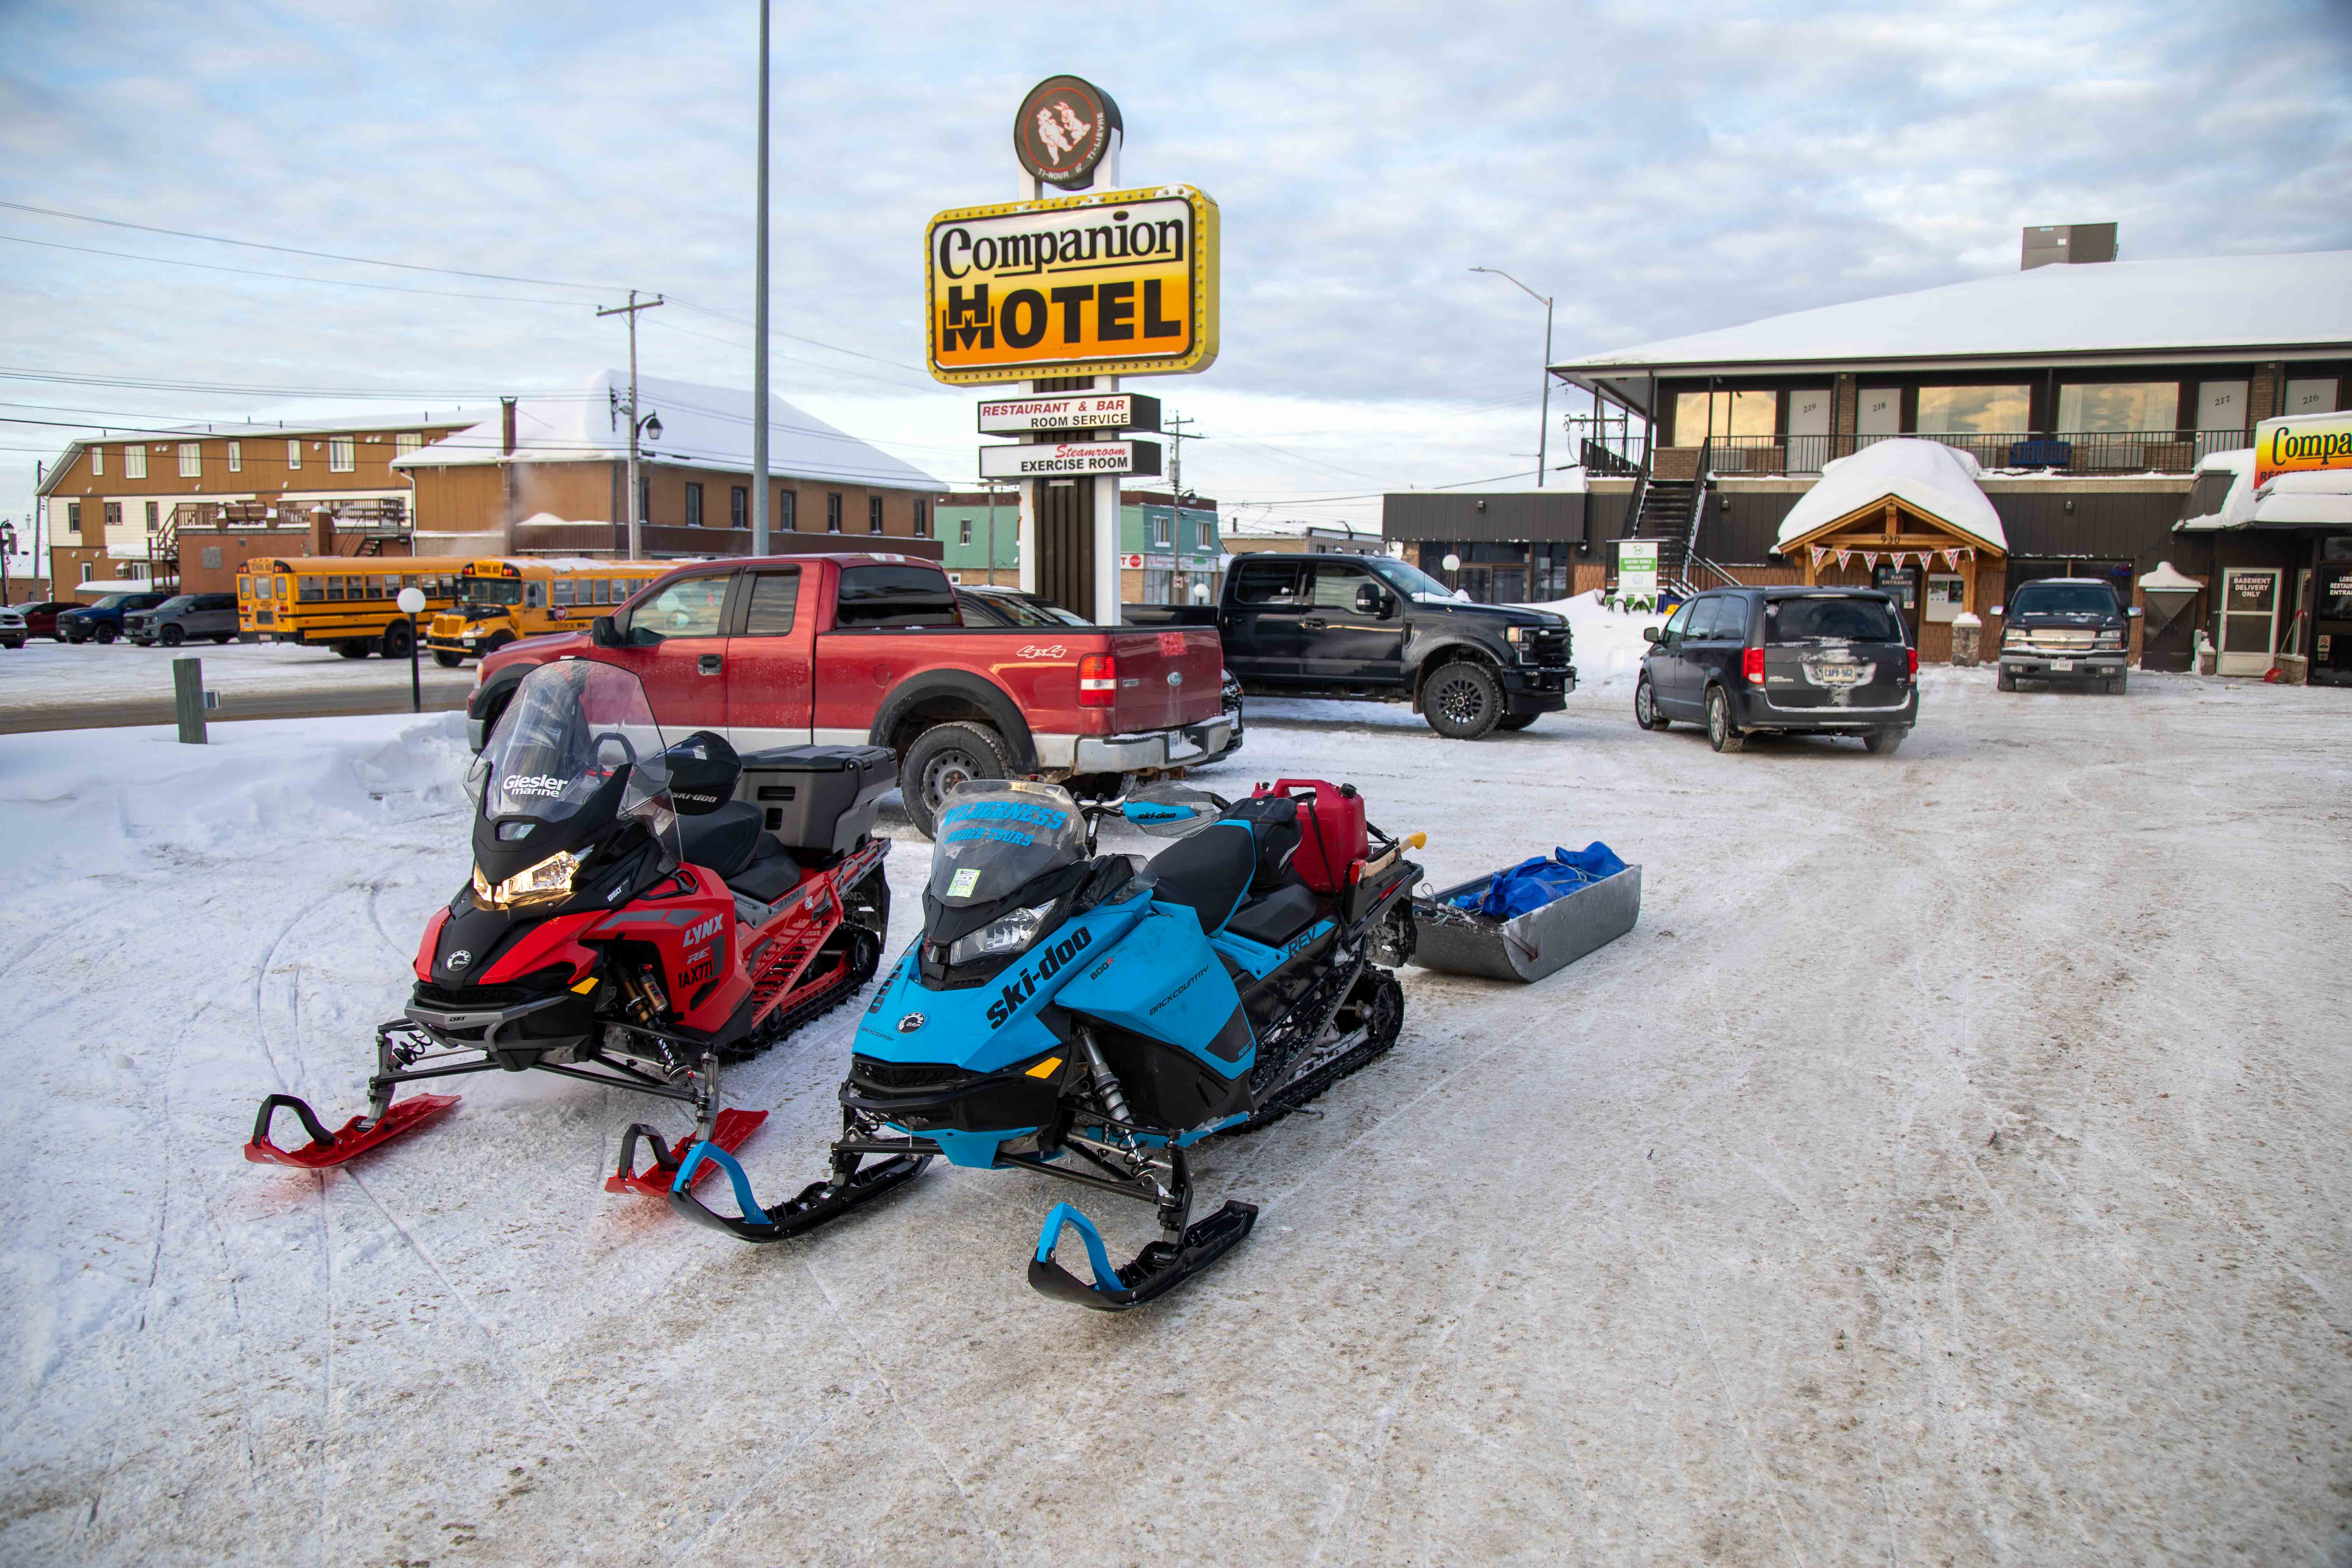 two snowmobiles parked in the snowy parking lot in front a a brown building and a sign that says "Companion Hotel"